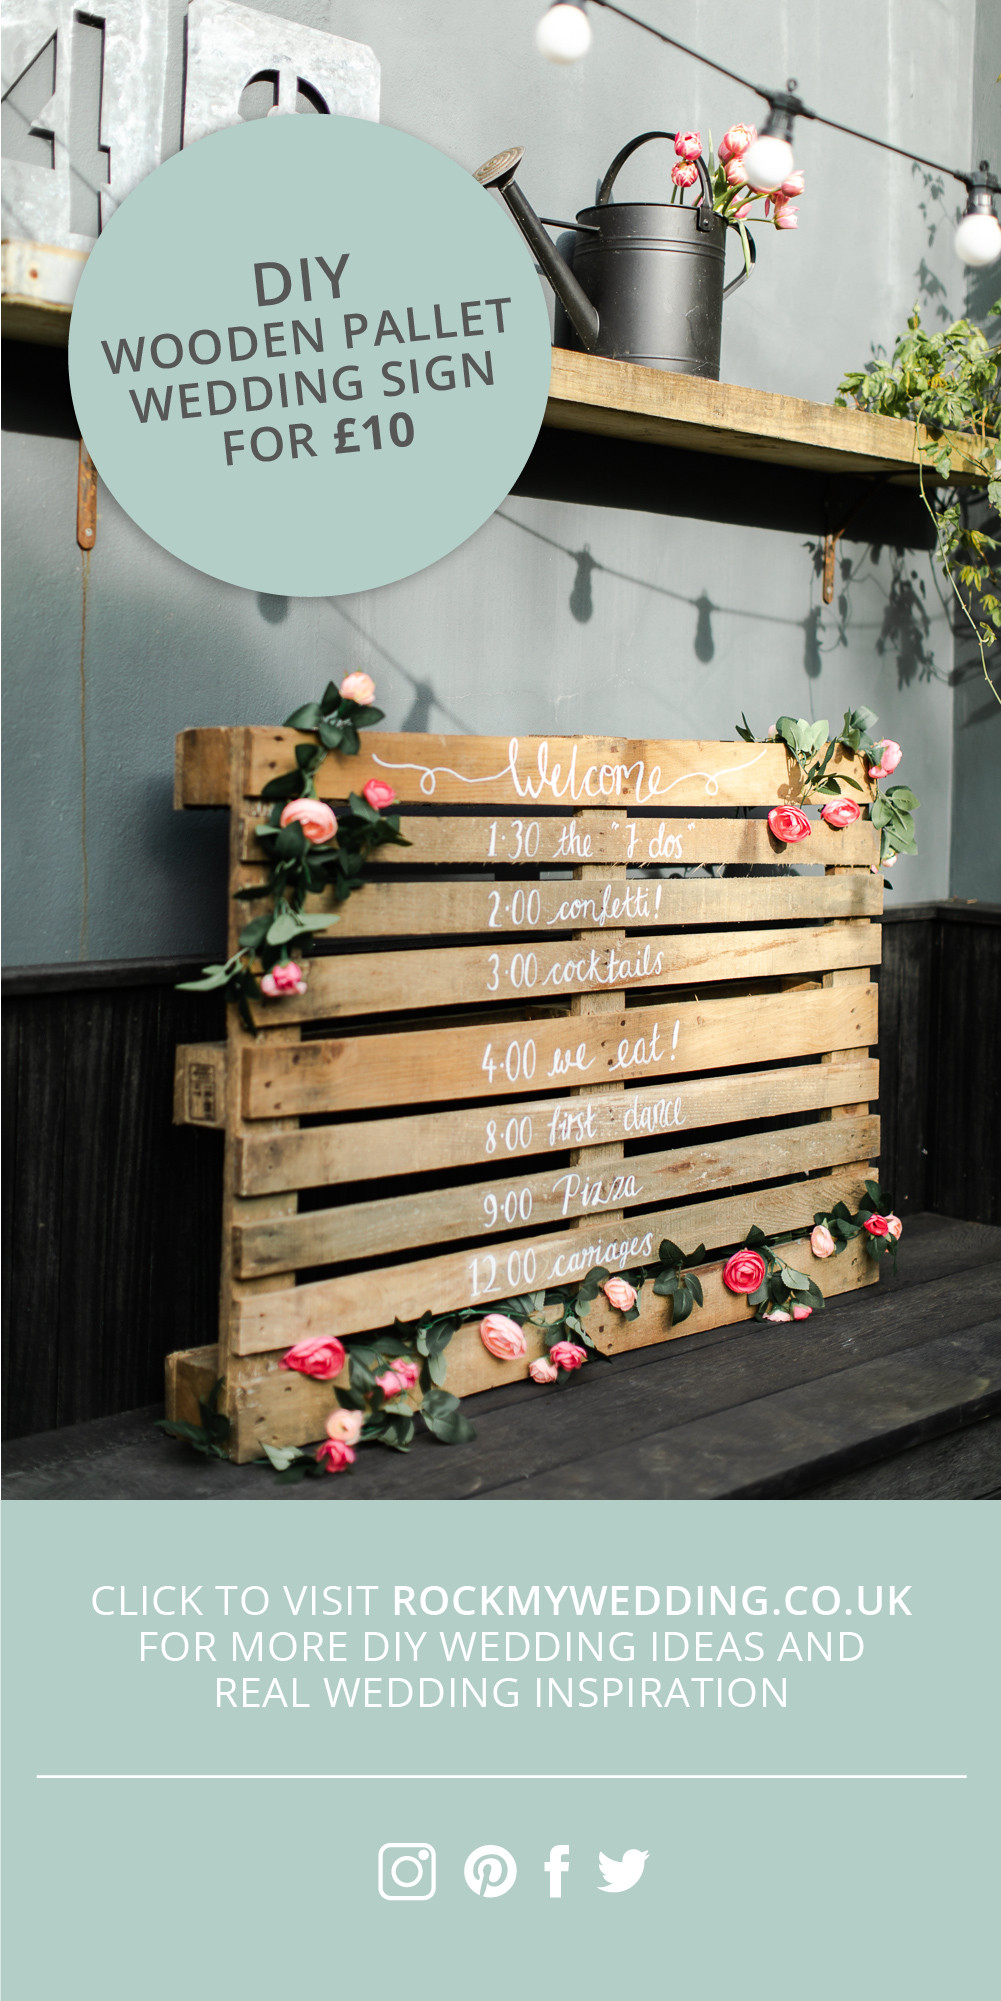 DIY Signs For Wedding
 Wooden Pallet Wedding Sign Make Your Own for Under £10